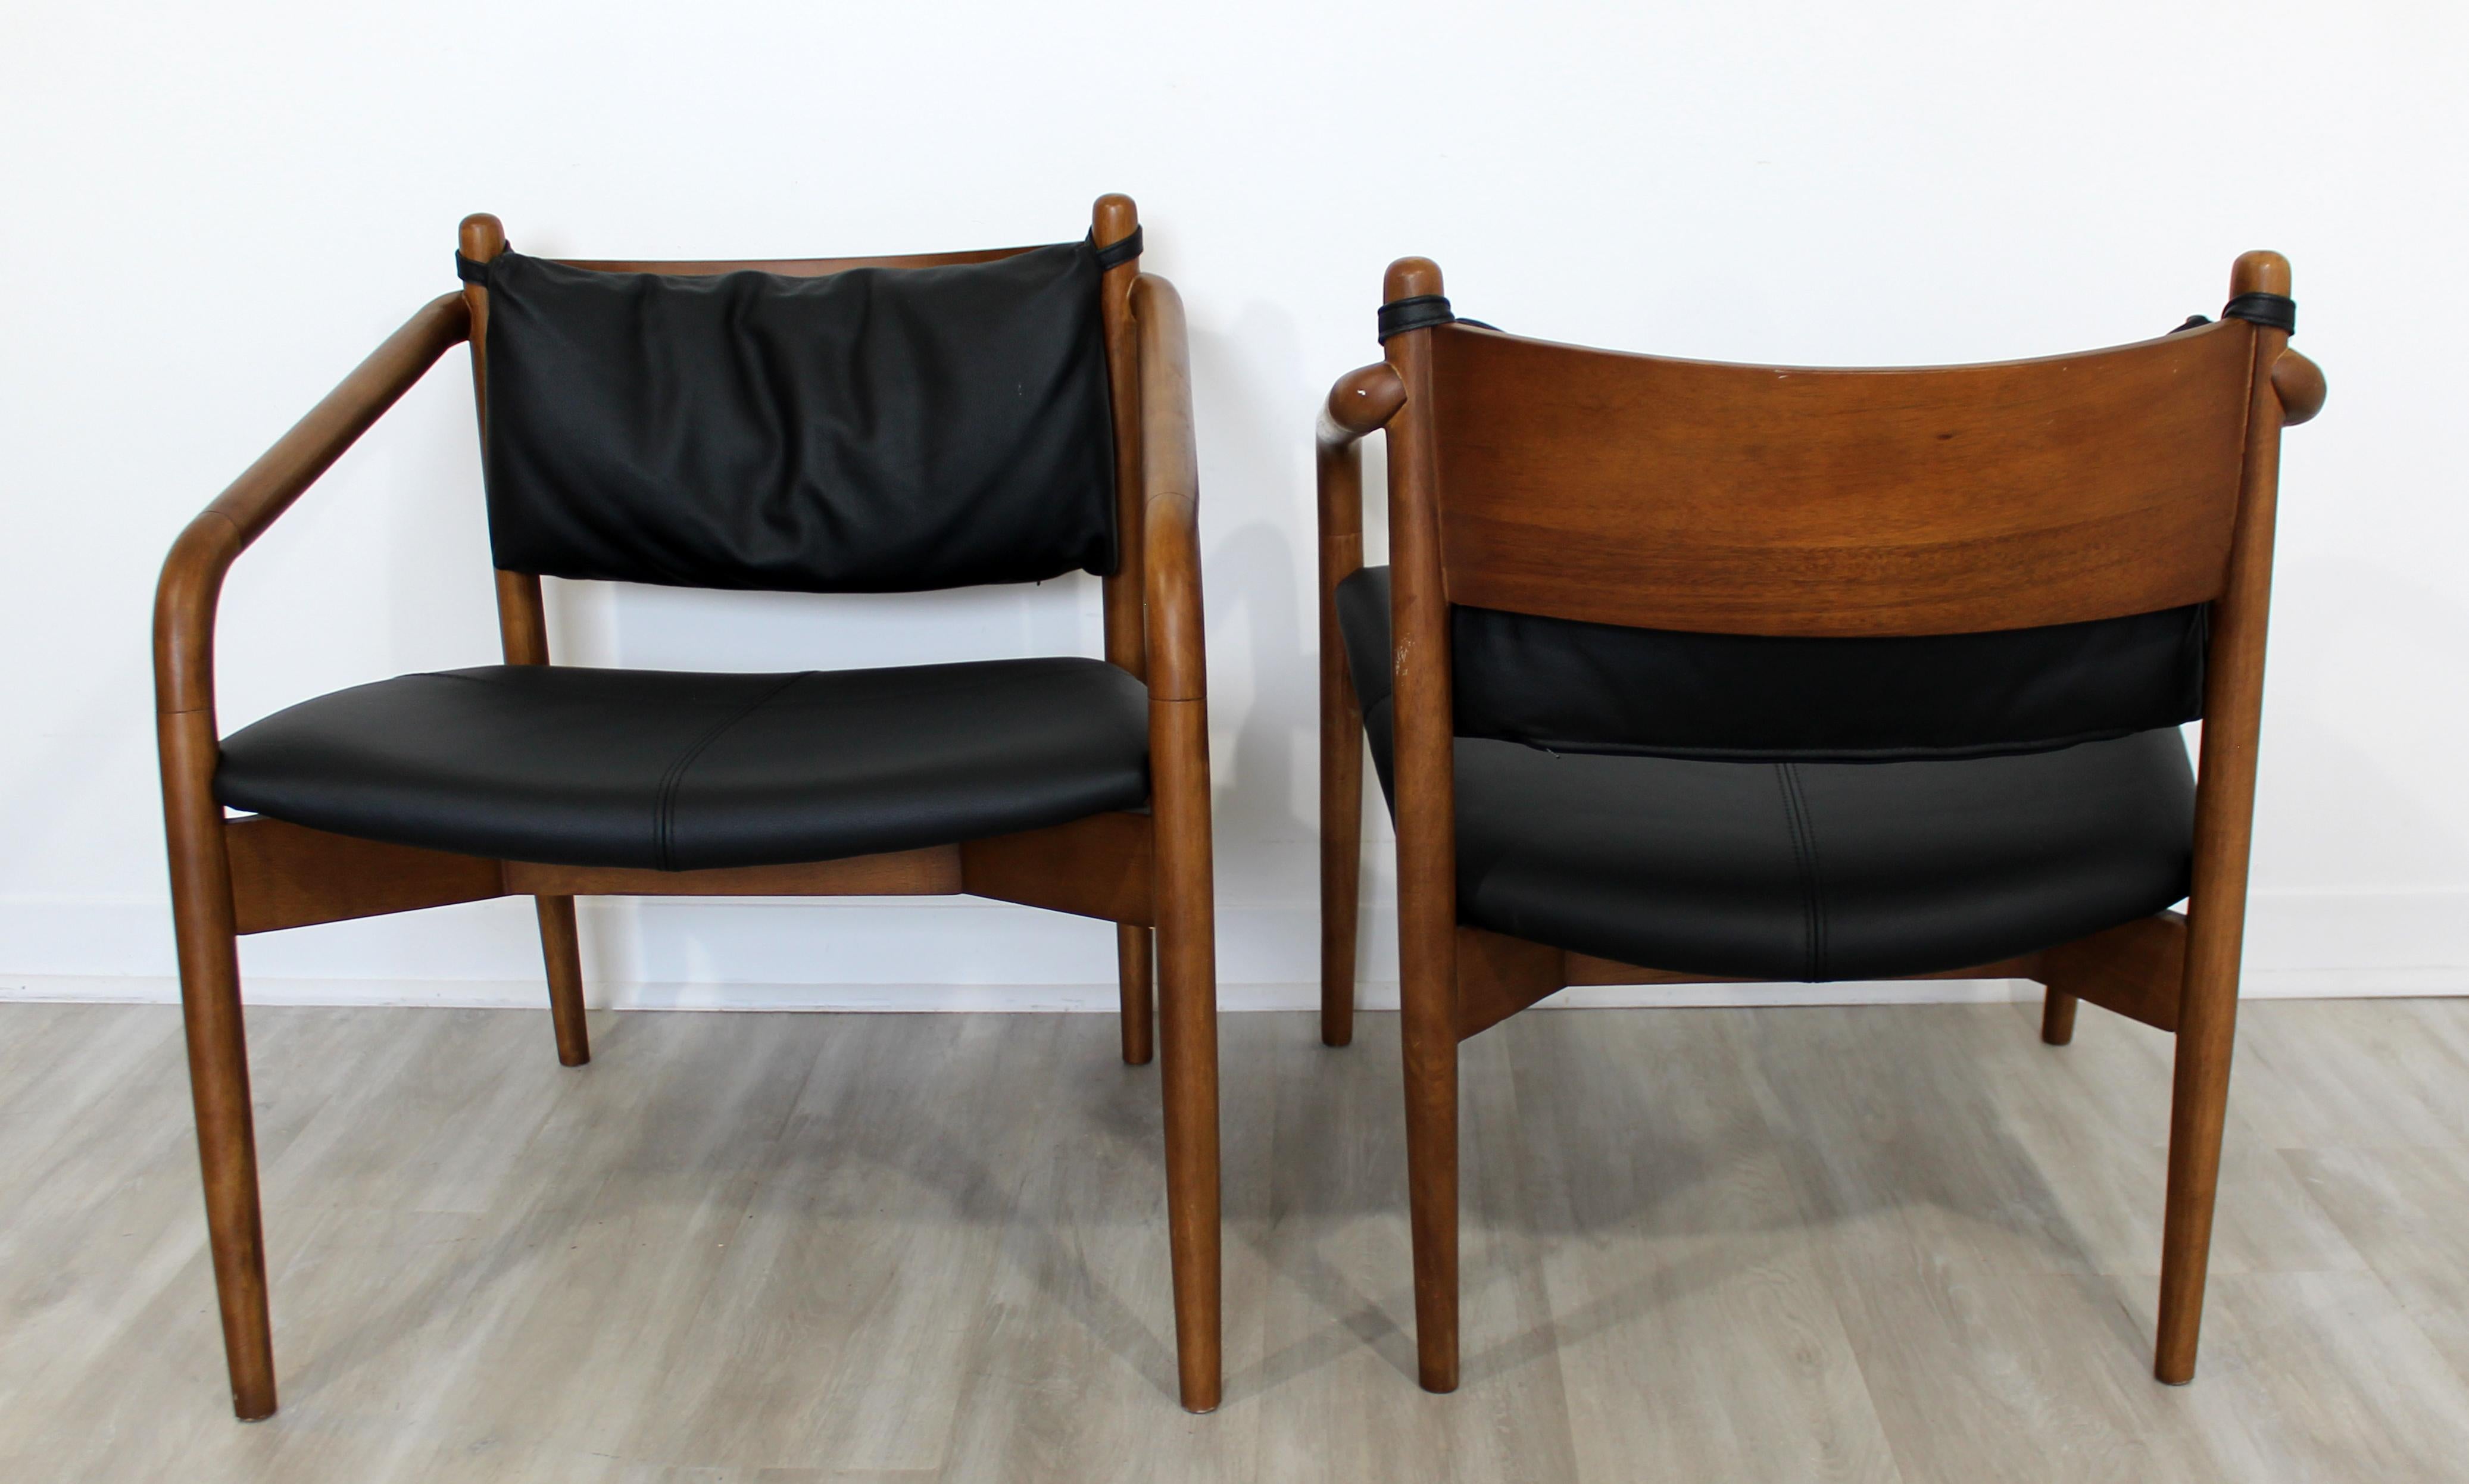 Late 20th Century Mid-Century Modern Pair of Curved Bent Wood and Leather Lounge Armchairs, 1970s